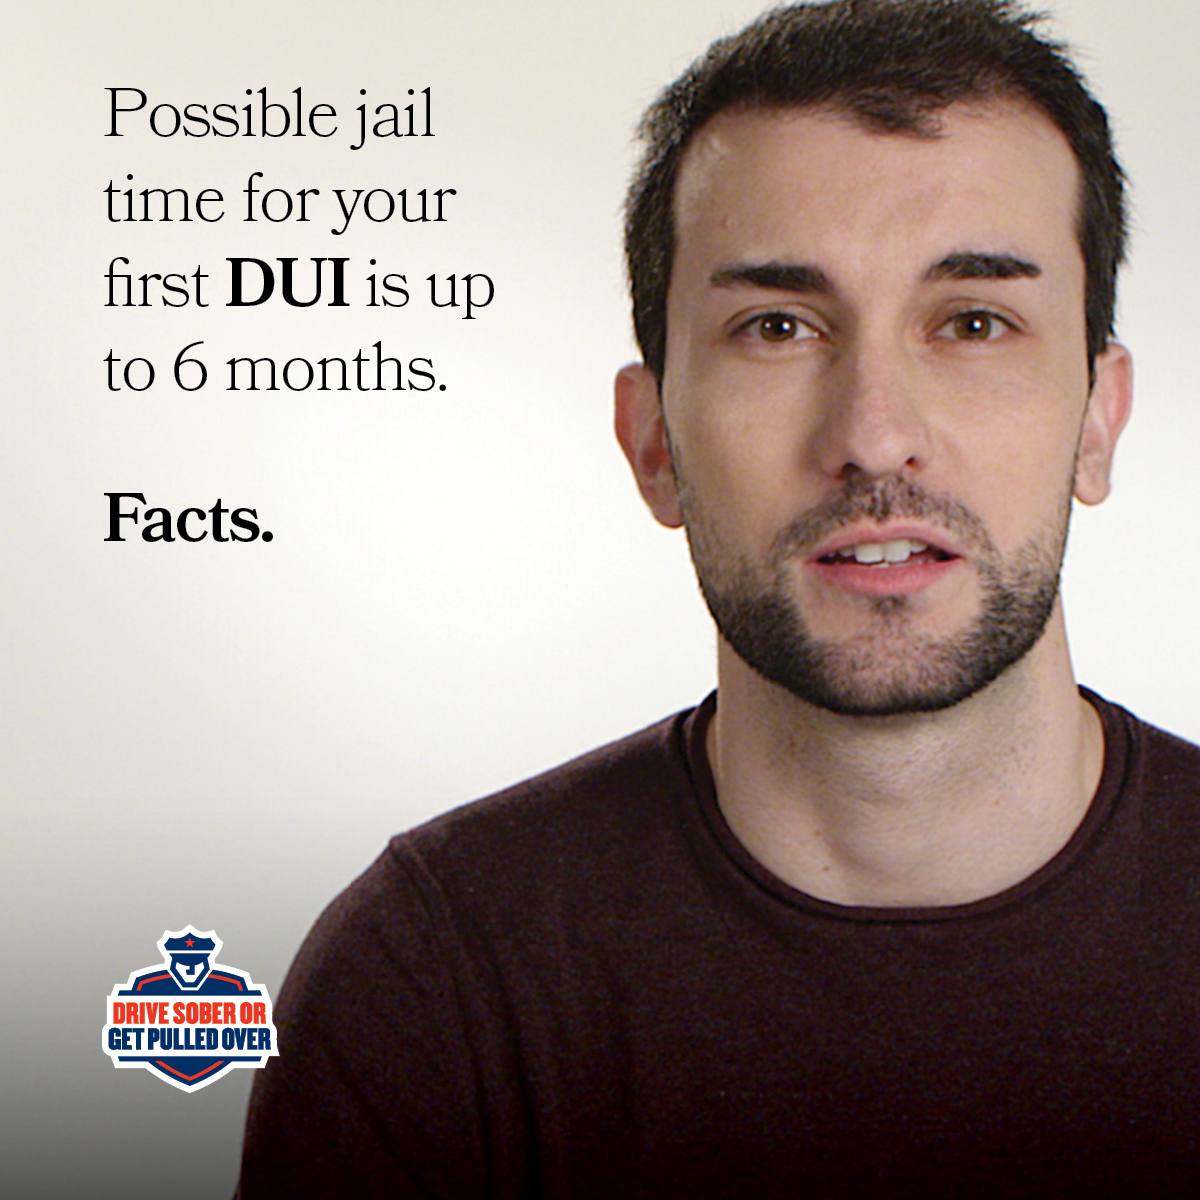 Did you know that your first DUI could land you behind bars for up to 6 months?  Do not get behind the wheel if you are impaired - it could cost you.  #Facts

#DriveSober #SafetyFirst #DontDrinkAndDrive #CTDOT #DriveSoberOrGetPulledOver